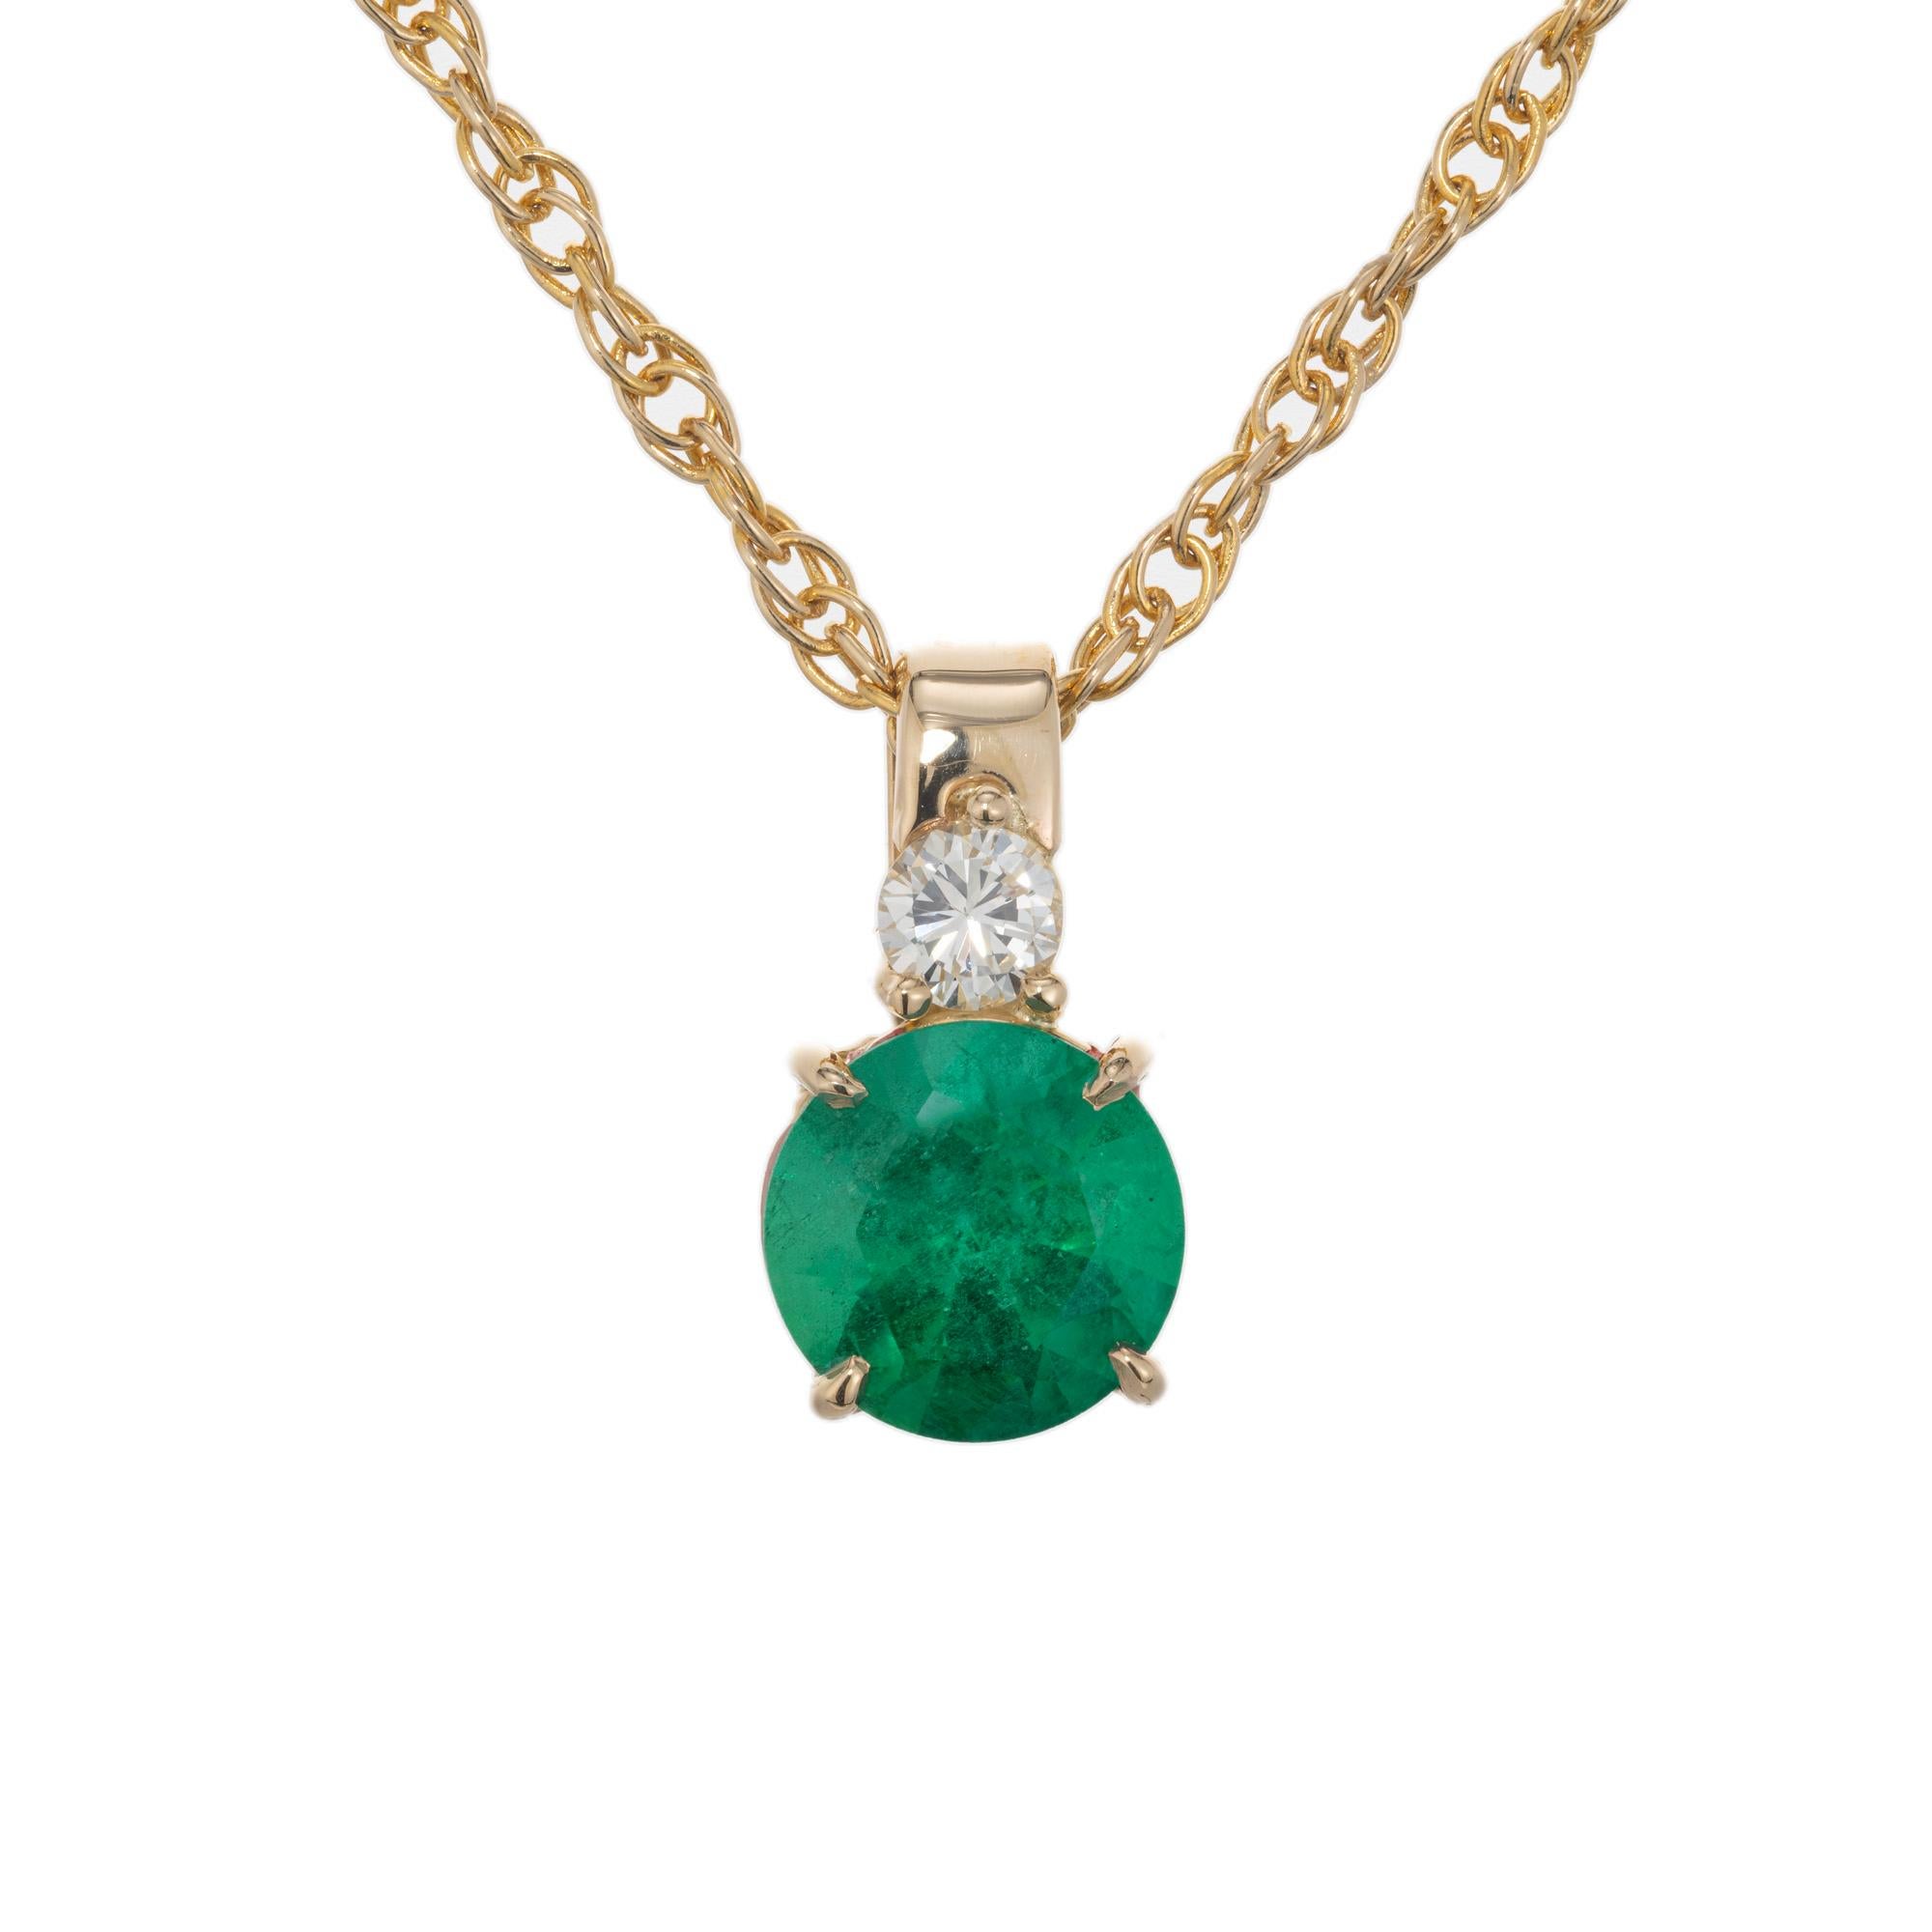 Emerald and diamond pendant necklace. GIA certified 1.08 carat round emerald set in a 14k yellow gold four prong setting, accented with a round cut diamond set atop the emerald on the bail. GIA has certified it as natural with F1  minor heating.